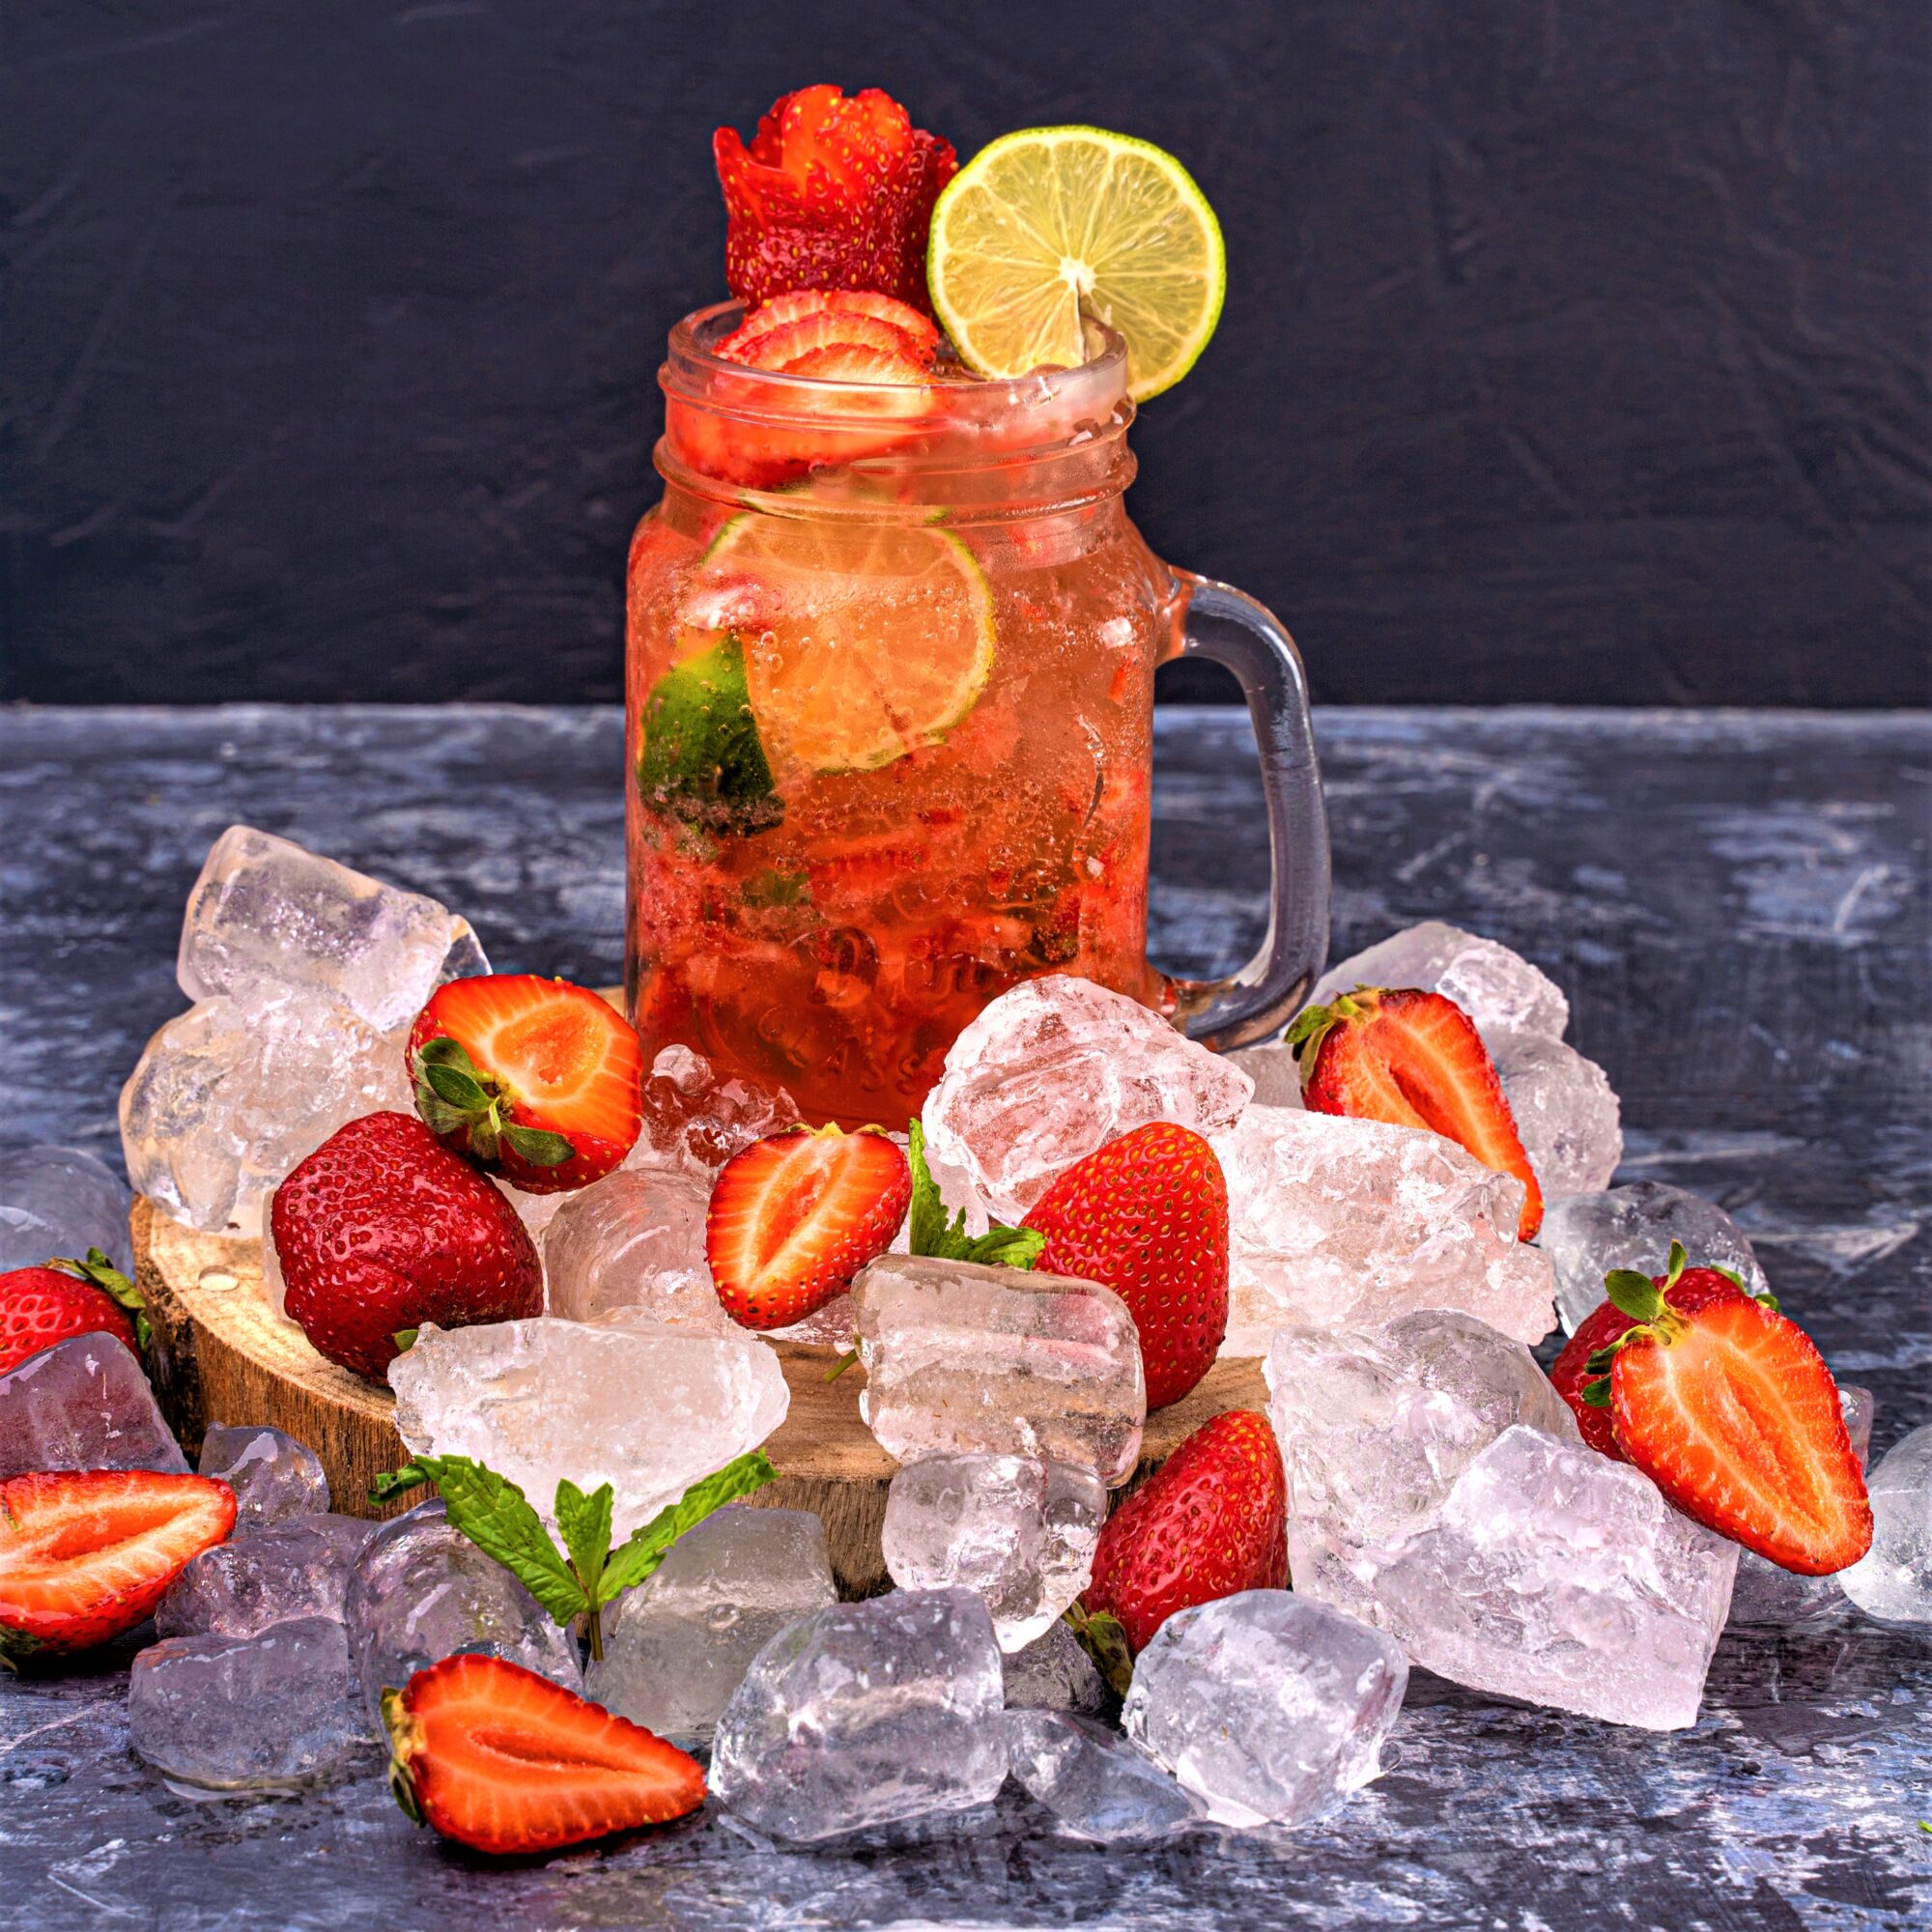 Glass of Pimms with ice and strawberries and on the surface